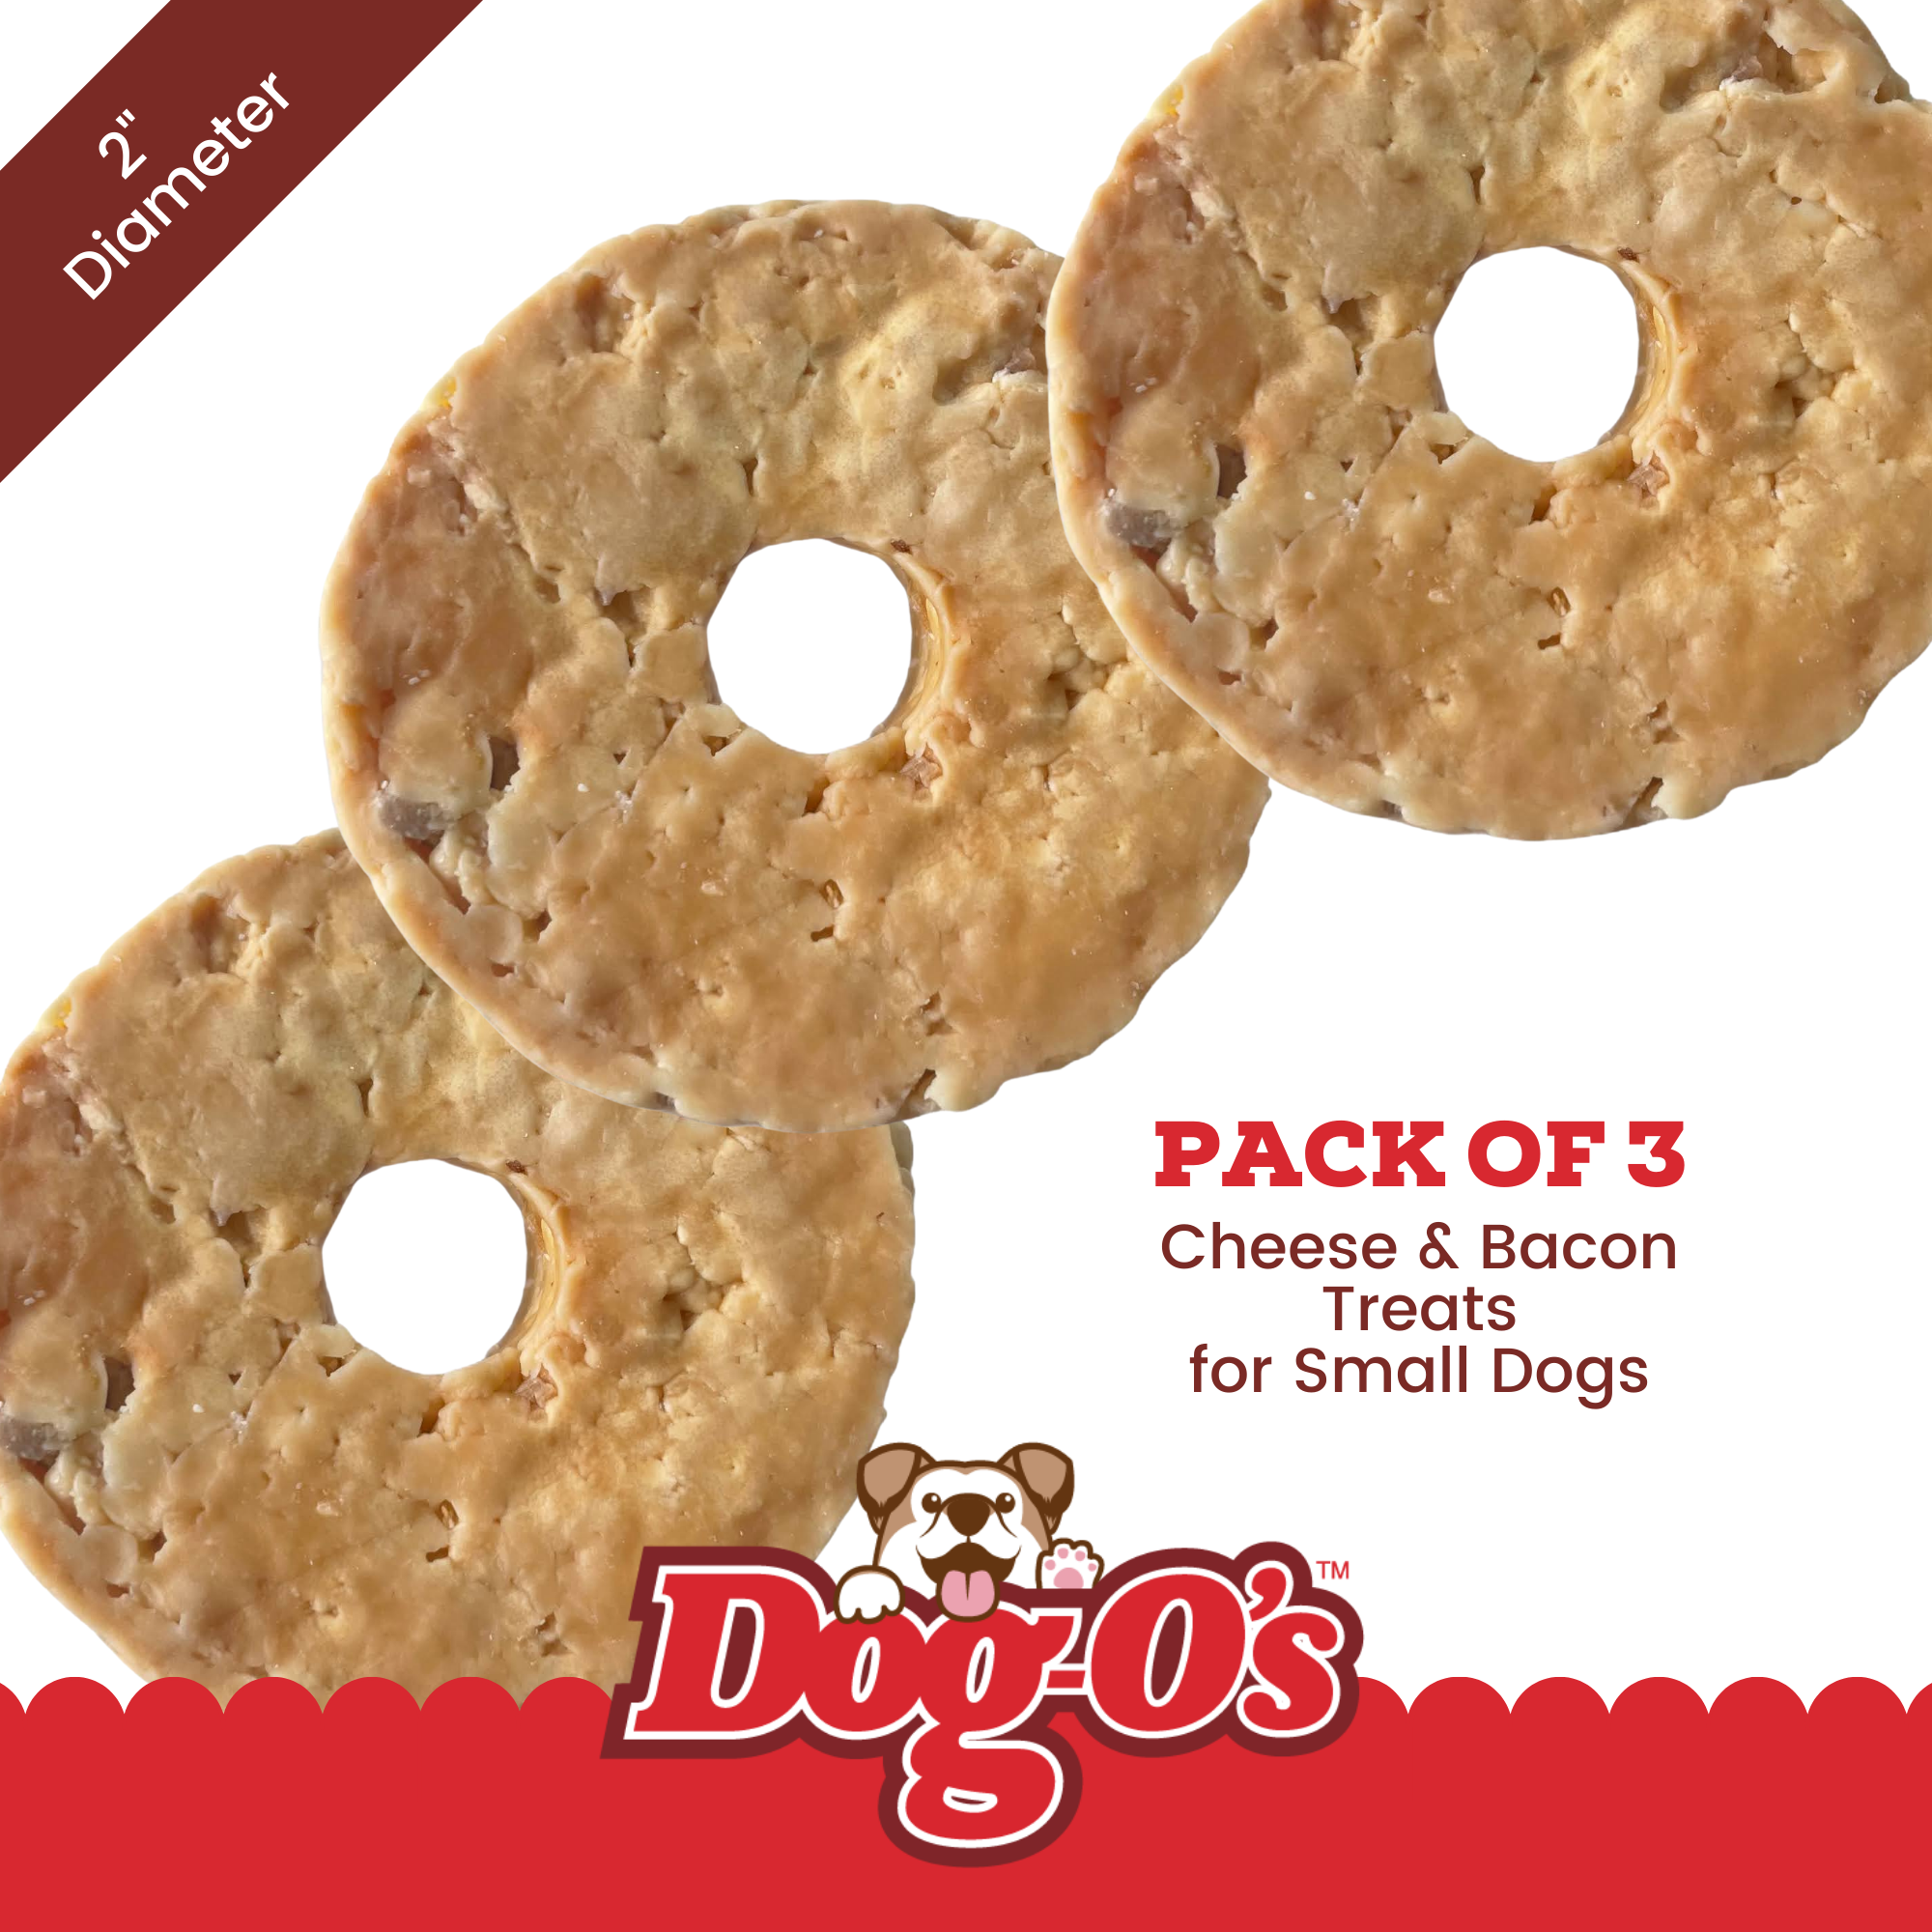 Dog-O’s Cheesy Chompers® with Bacon